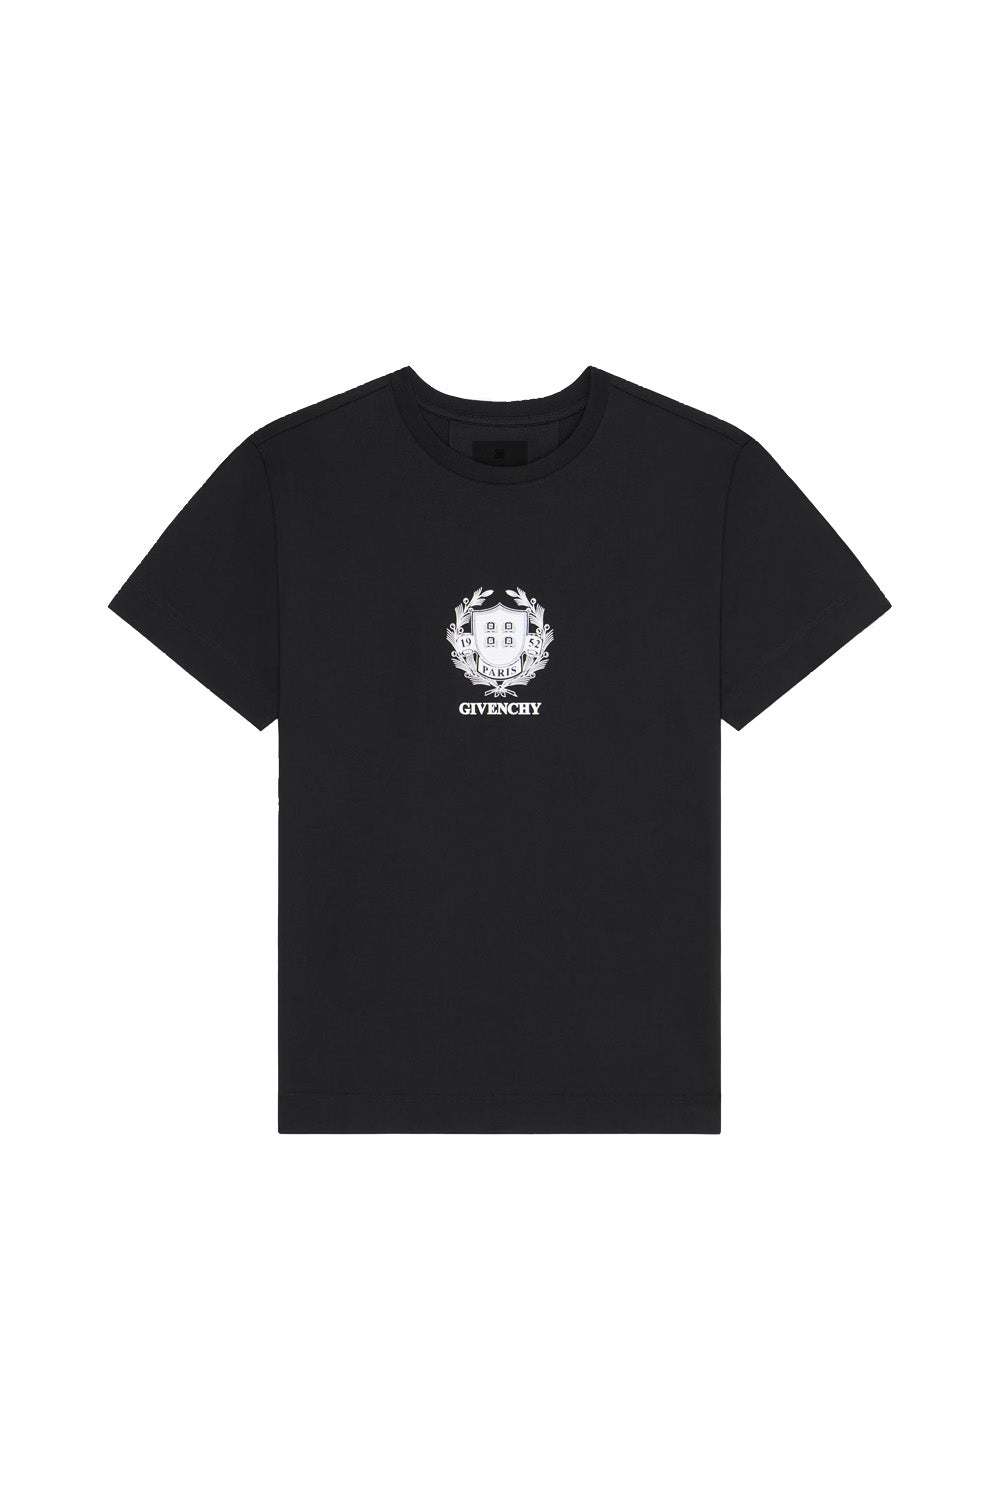 Givenchy Classic Fit Crest t-shirt in cotton